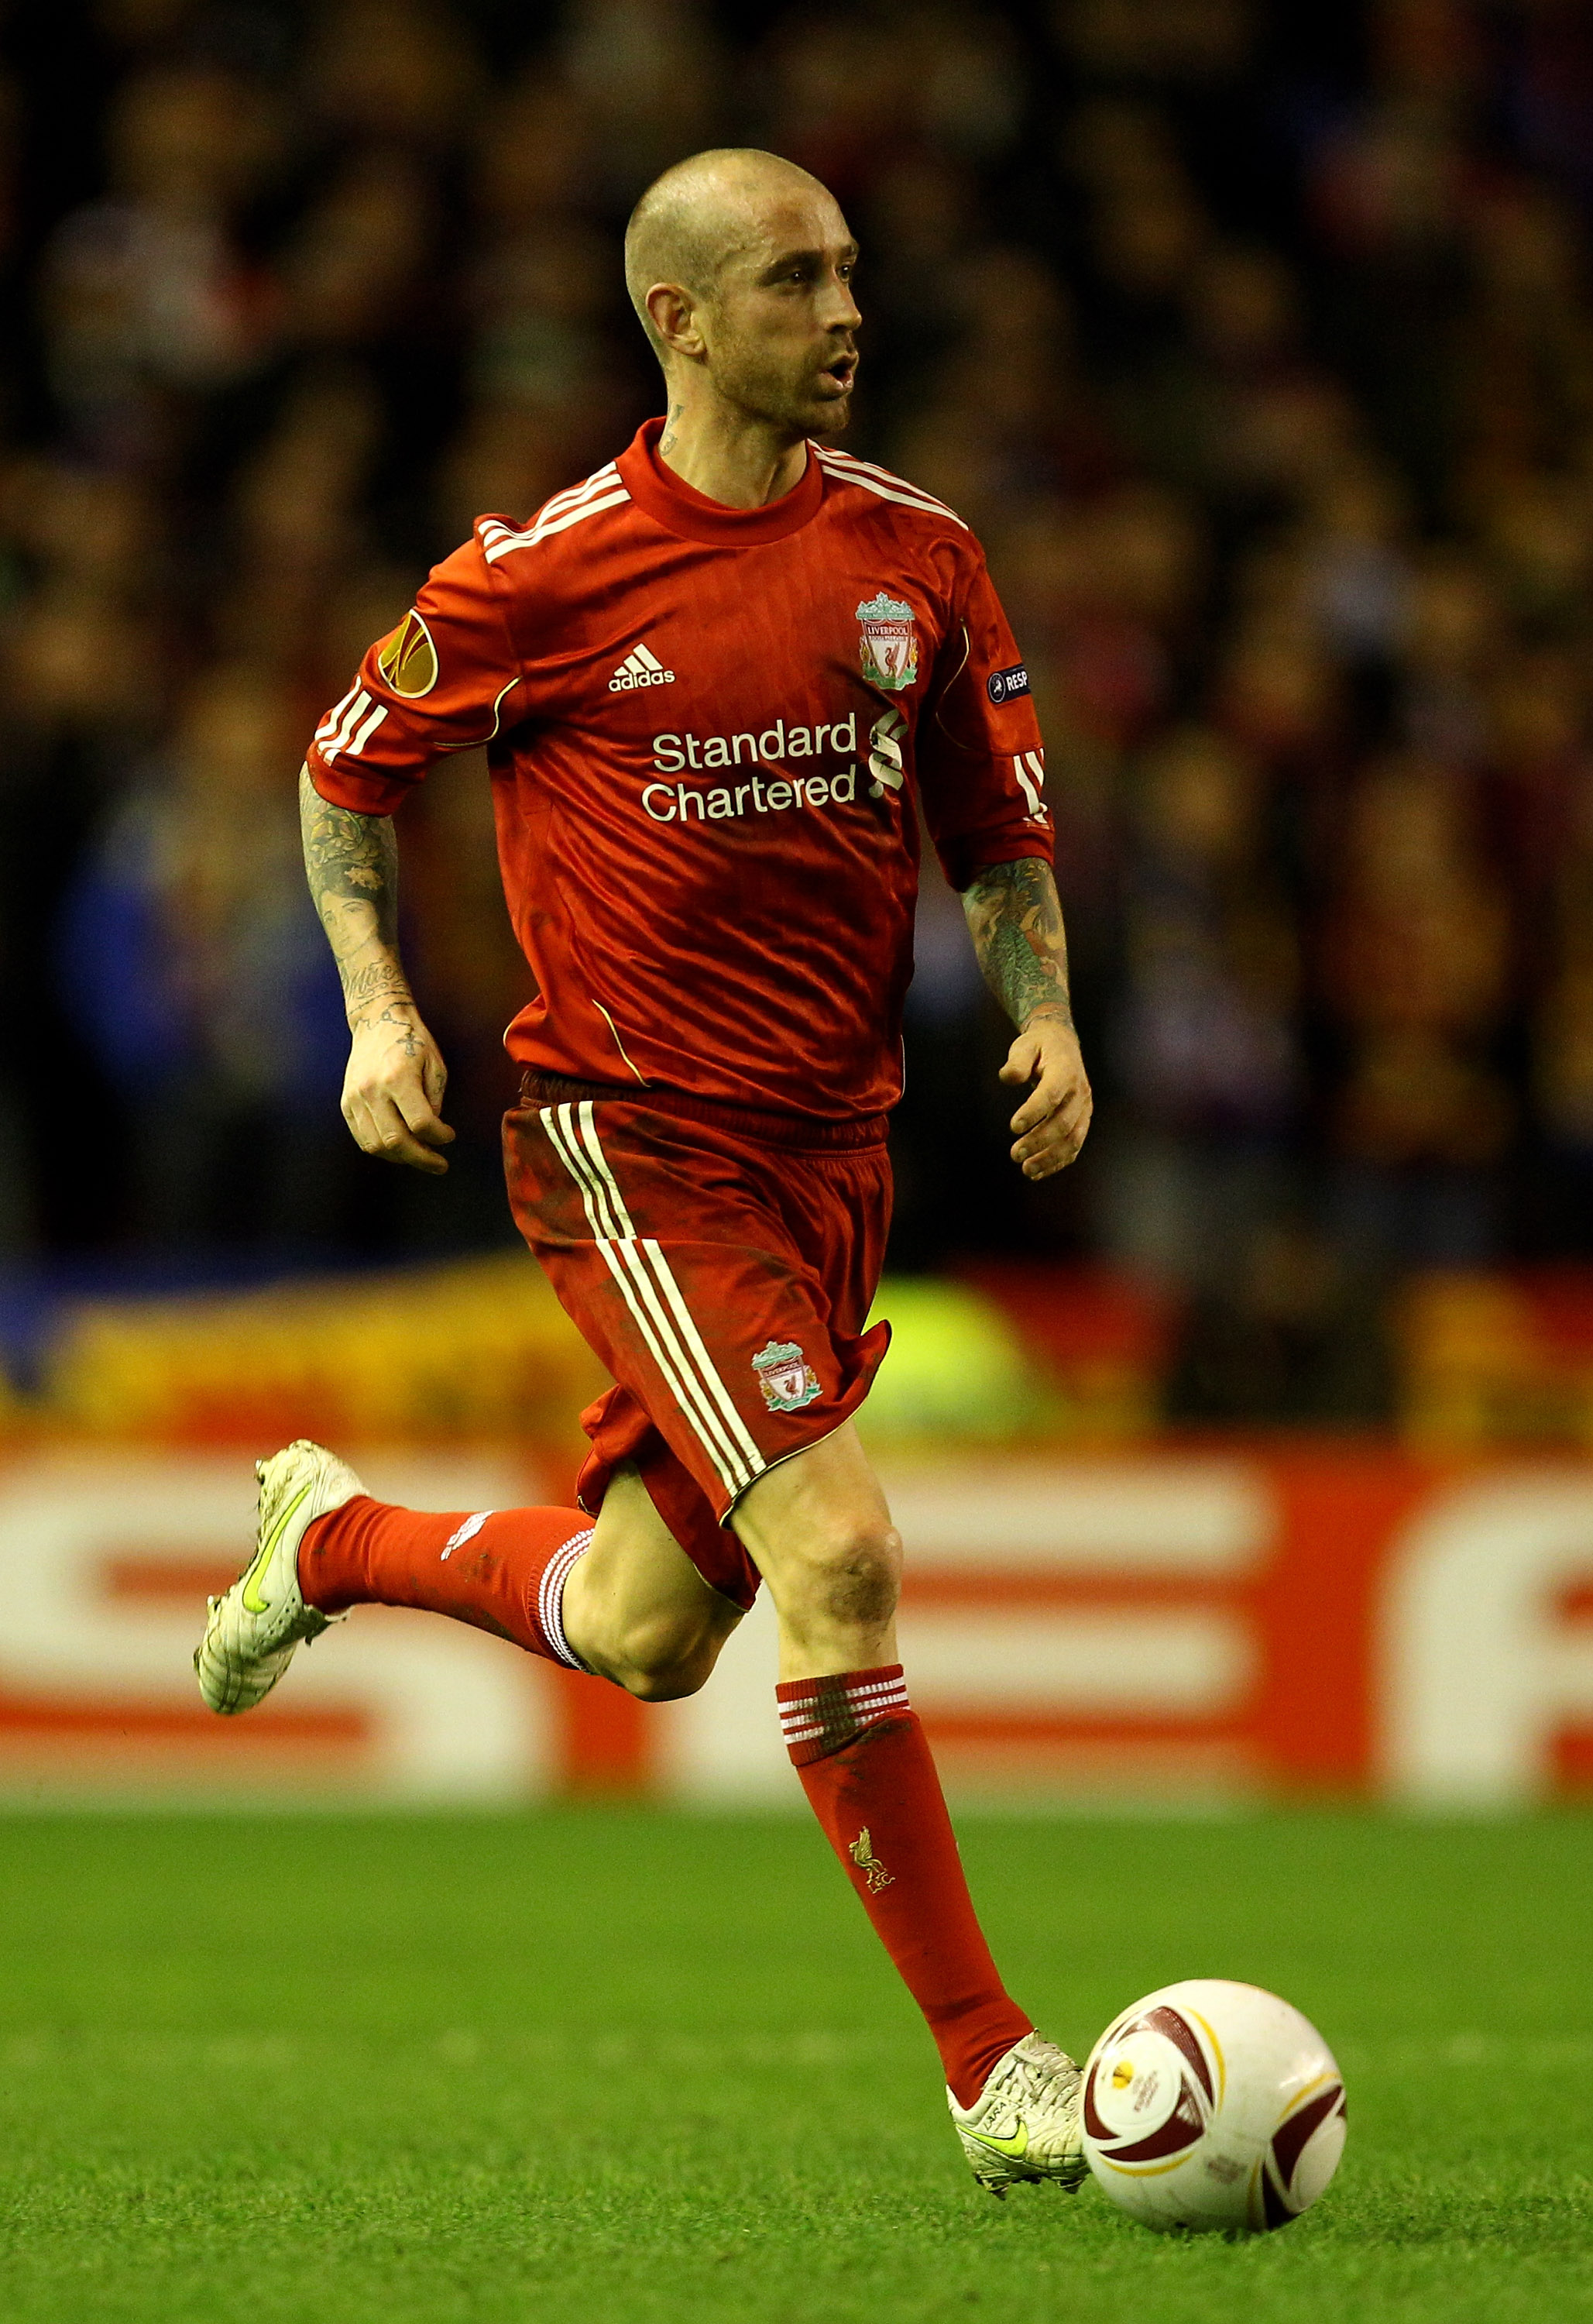 LIVERPOOL, ENGLAND - FEBRUARY 24:   Raul Meireles of Liverpool in action during the UEFA Europa League Round of 32 2nd leg match beteween Liverpool and Sparta Prague at Anfield on February 24, 2011 in Liverpool, England.  (Photo by Richard Heathcote/Getty